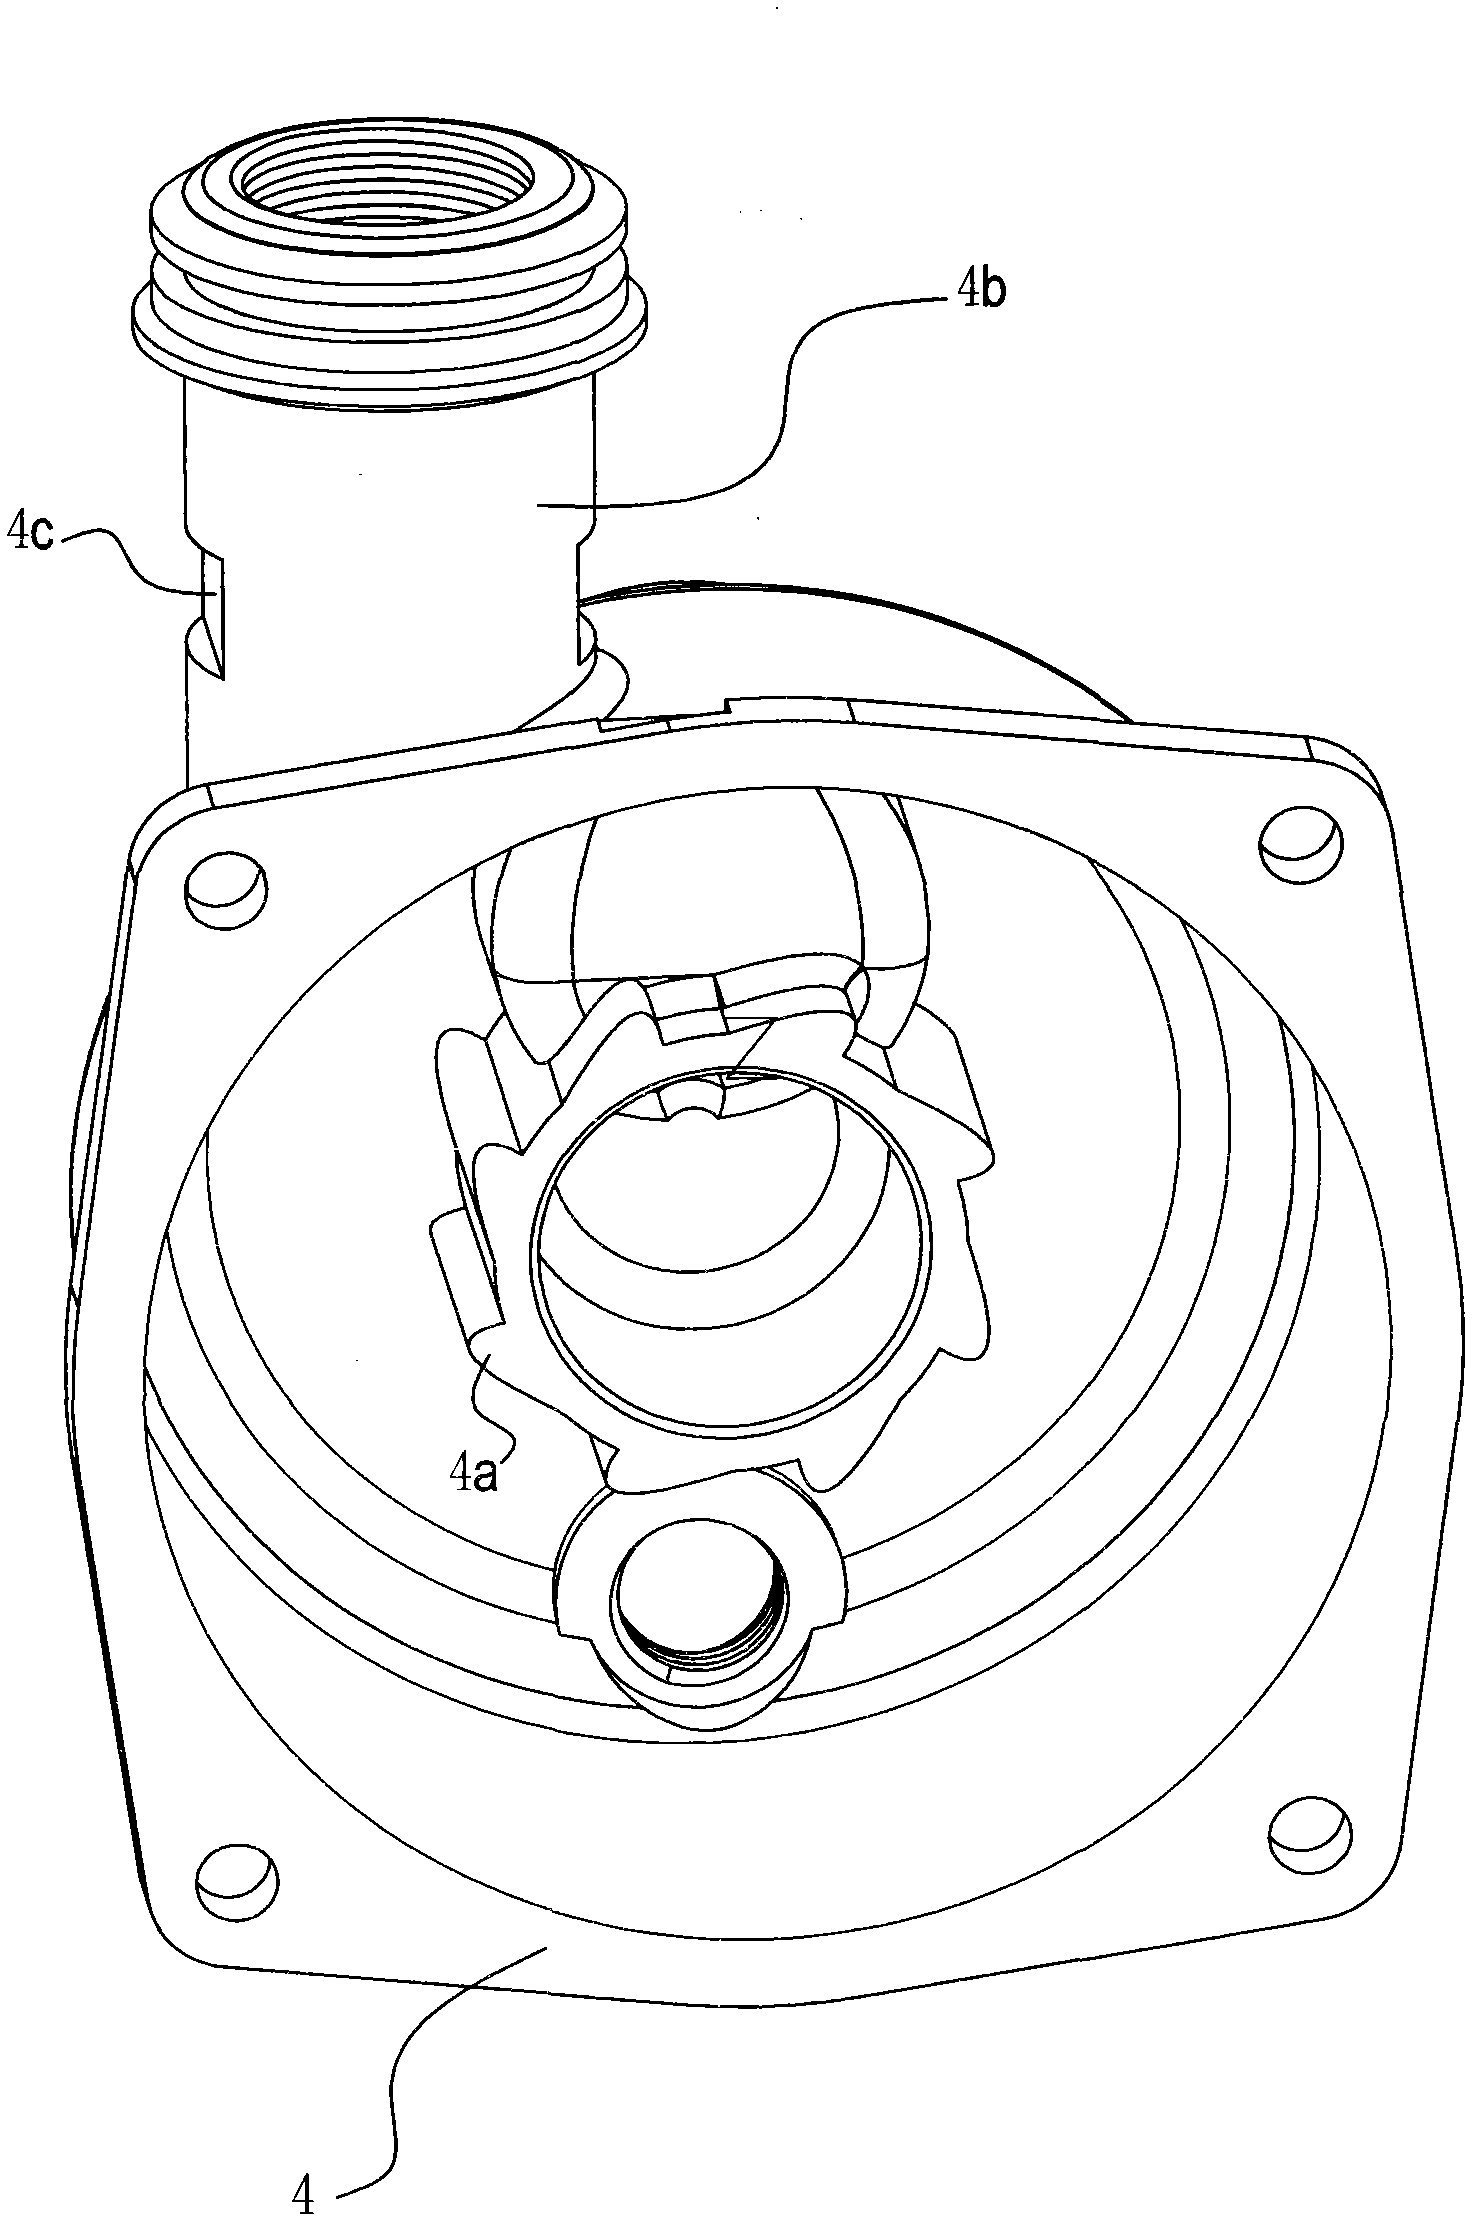 Centrifugal pump with swirl sprayer engine directly connected with high-speed function vane wheel and even-spinning labyrinth